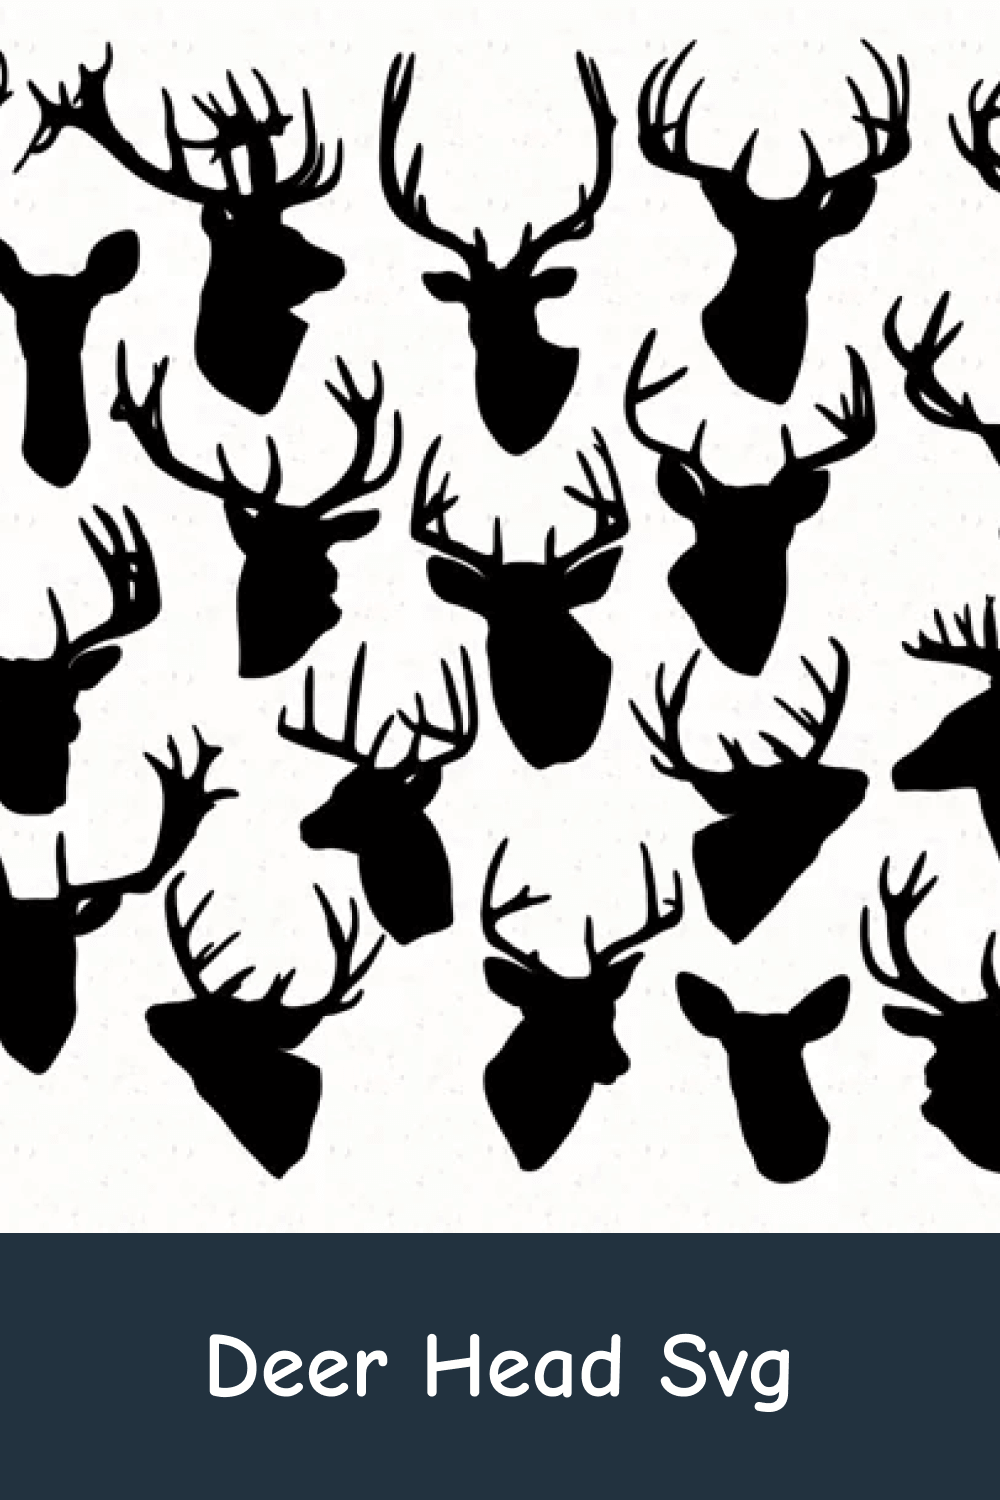 Many Different Types of Deer.